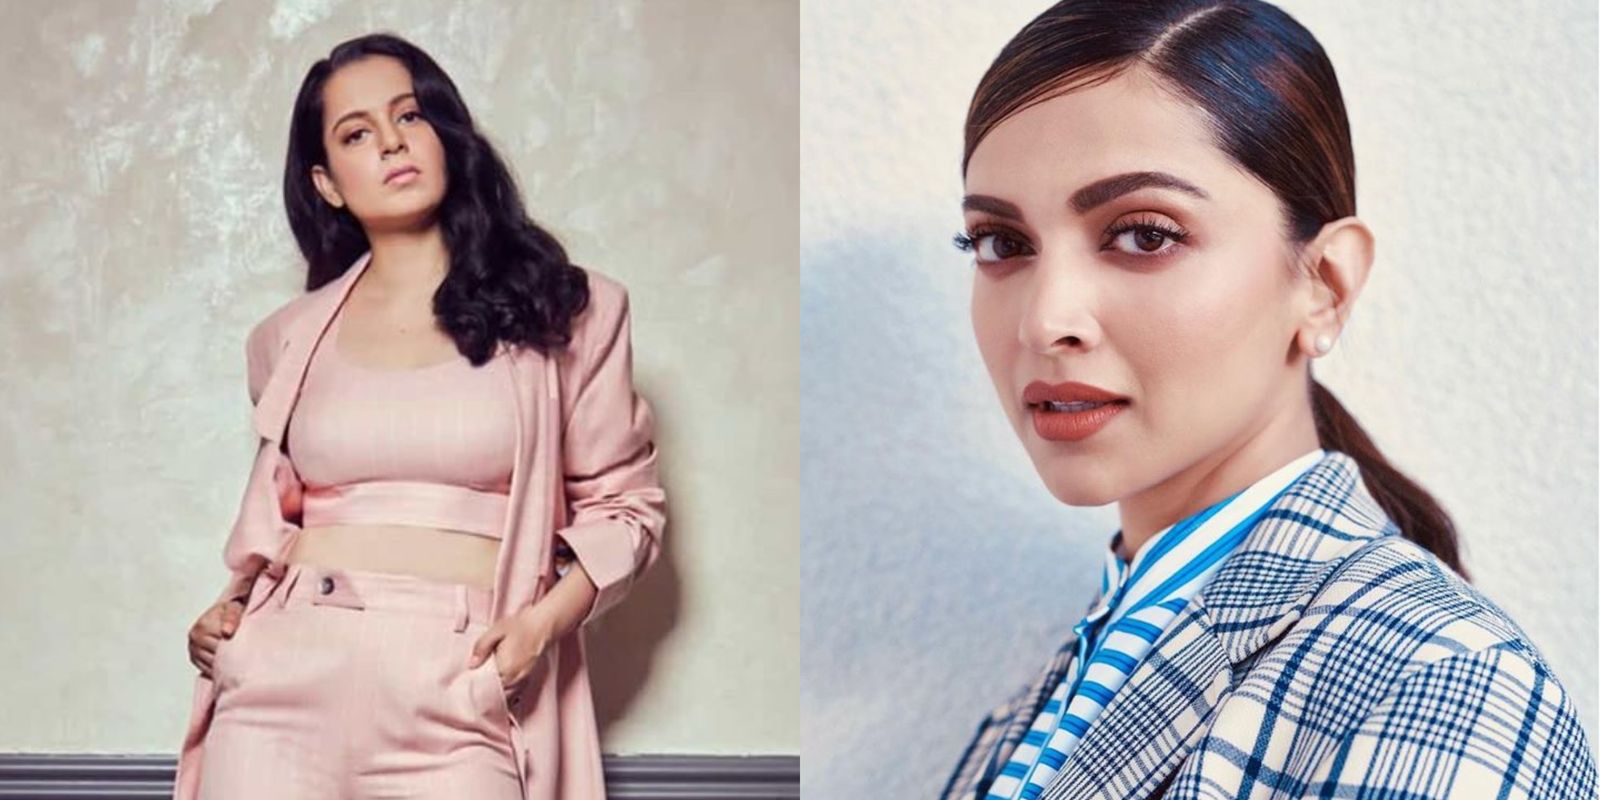 Kangana Says Deepika Padukone Suddenly Got Depressed Over A 10 Yr. Old Break Up, Asks 'Why You Forcing Illness On Us?'